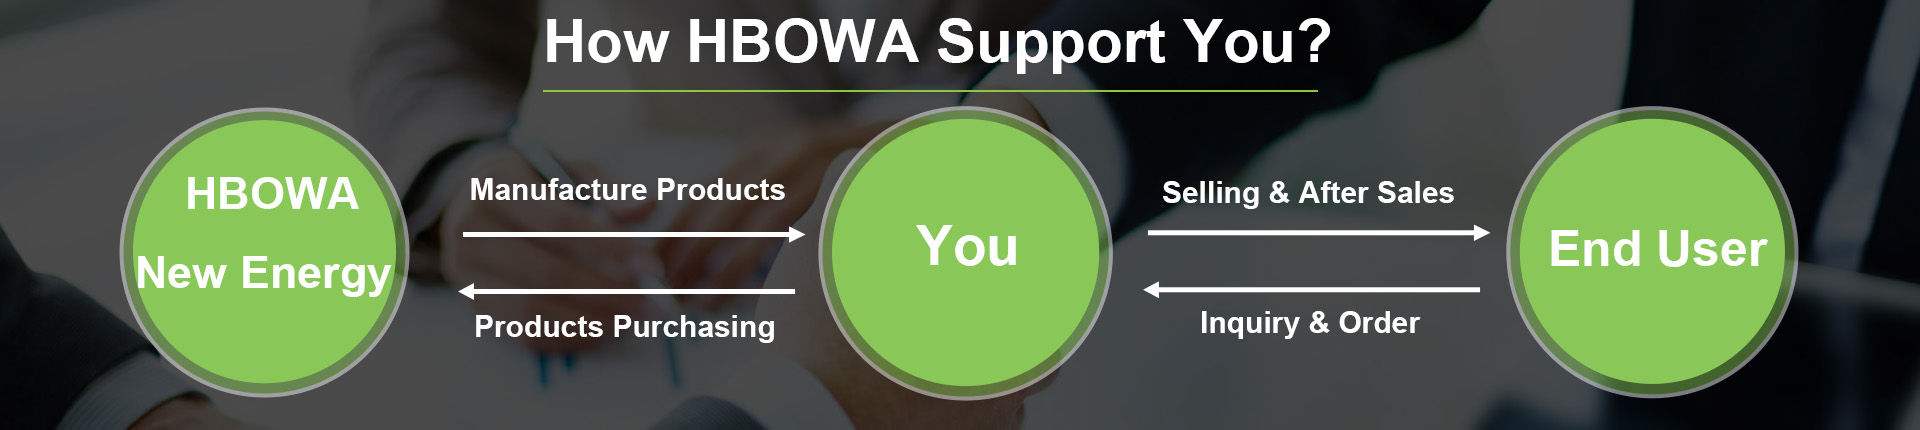 hbowa service to support you